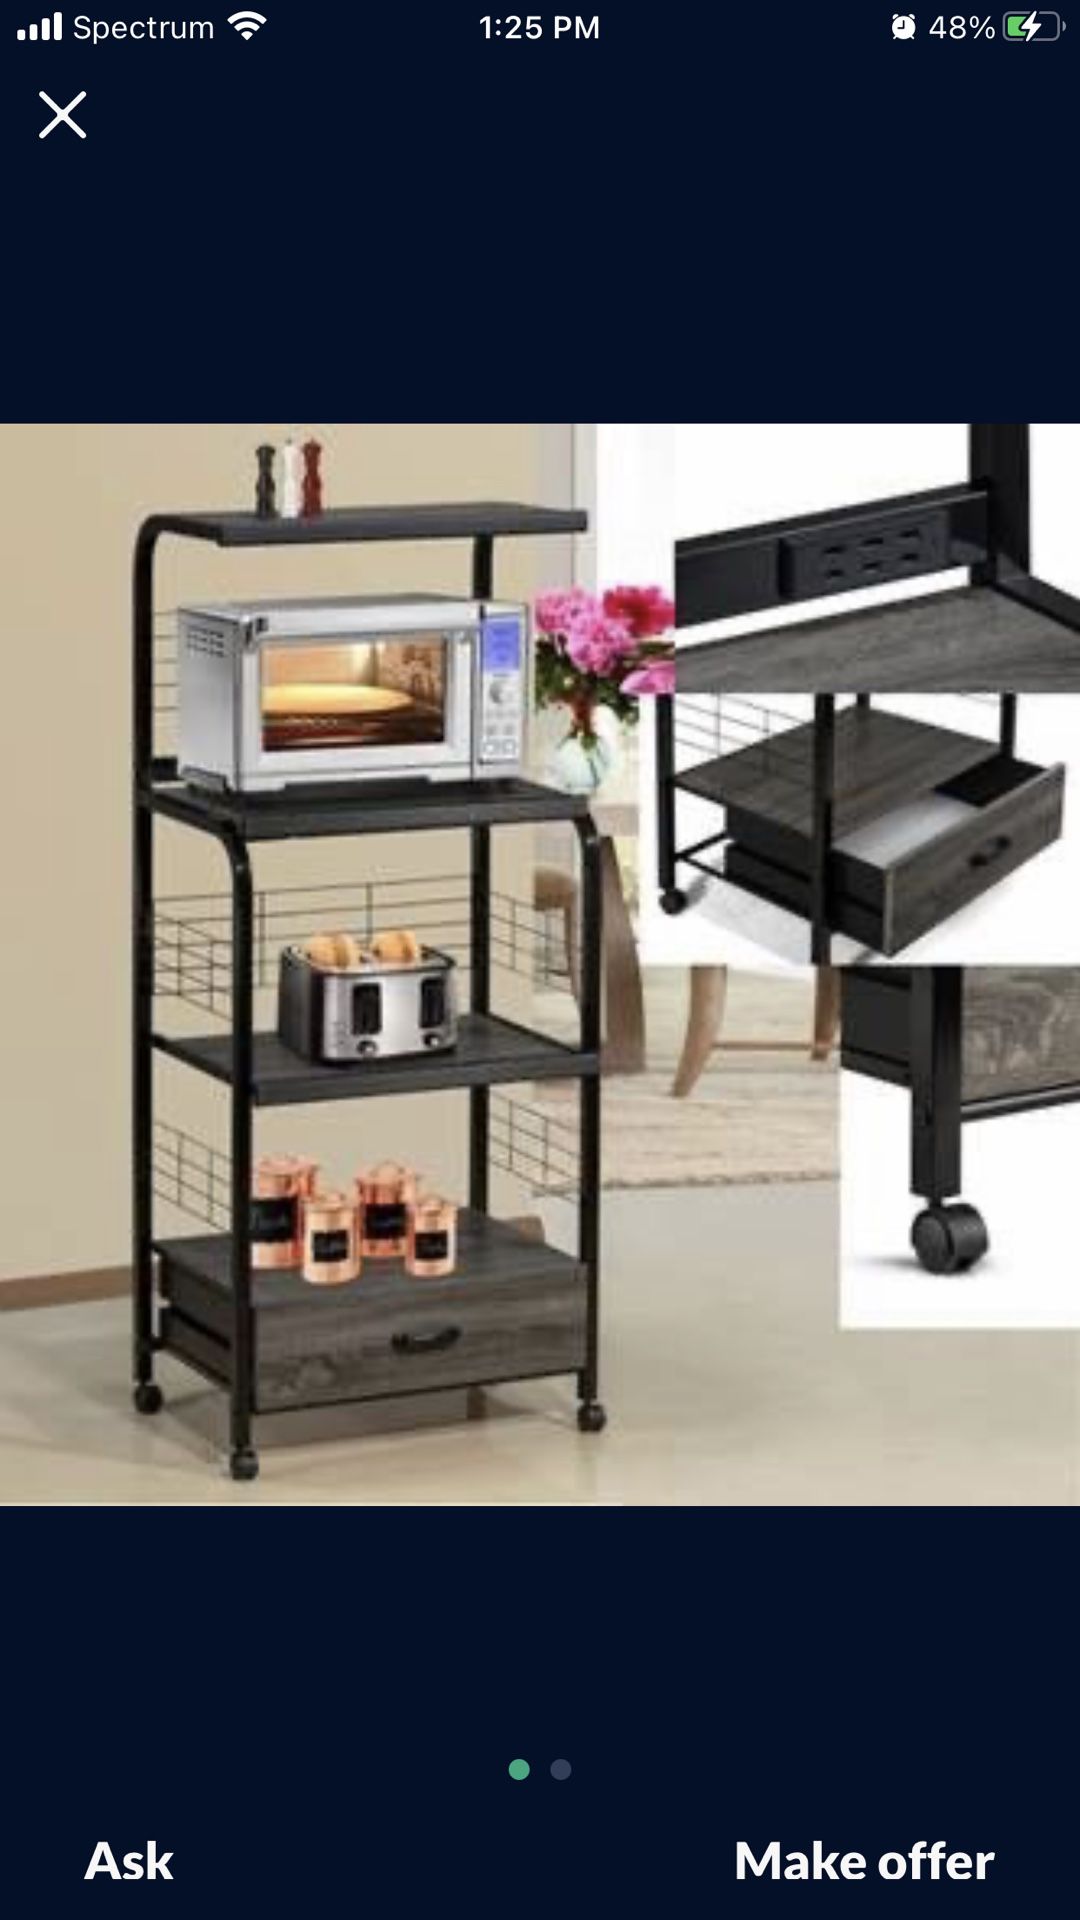 Brand New Microwave Organizer Shelving Drawer Weels $140 FREE LOCAL DELIVERY  ORDER HERE PAY UPON DELIVERY LITTLE SHOWROOM  NOT ALL ITEMS ON DISPLAY V